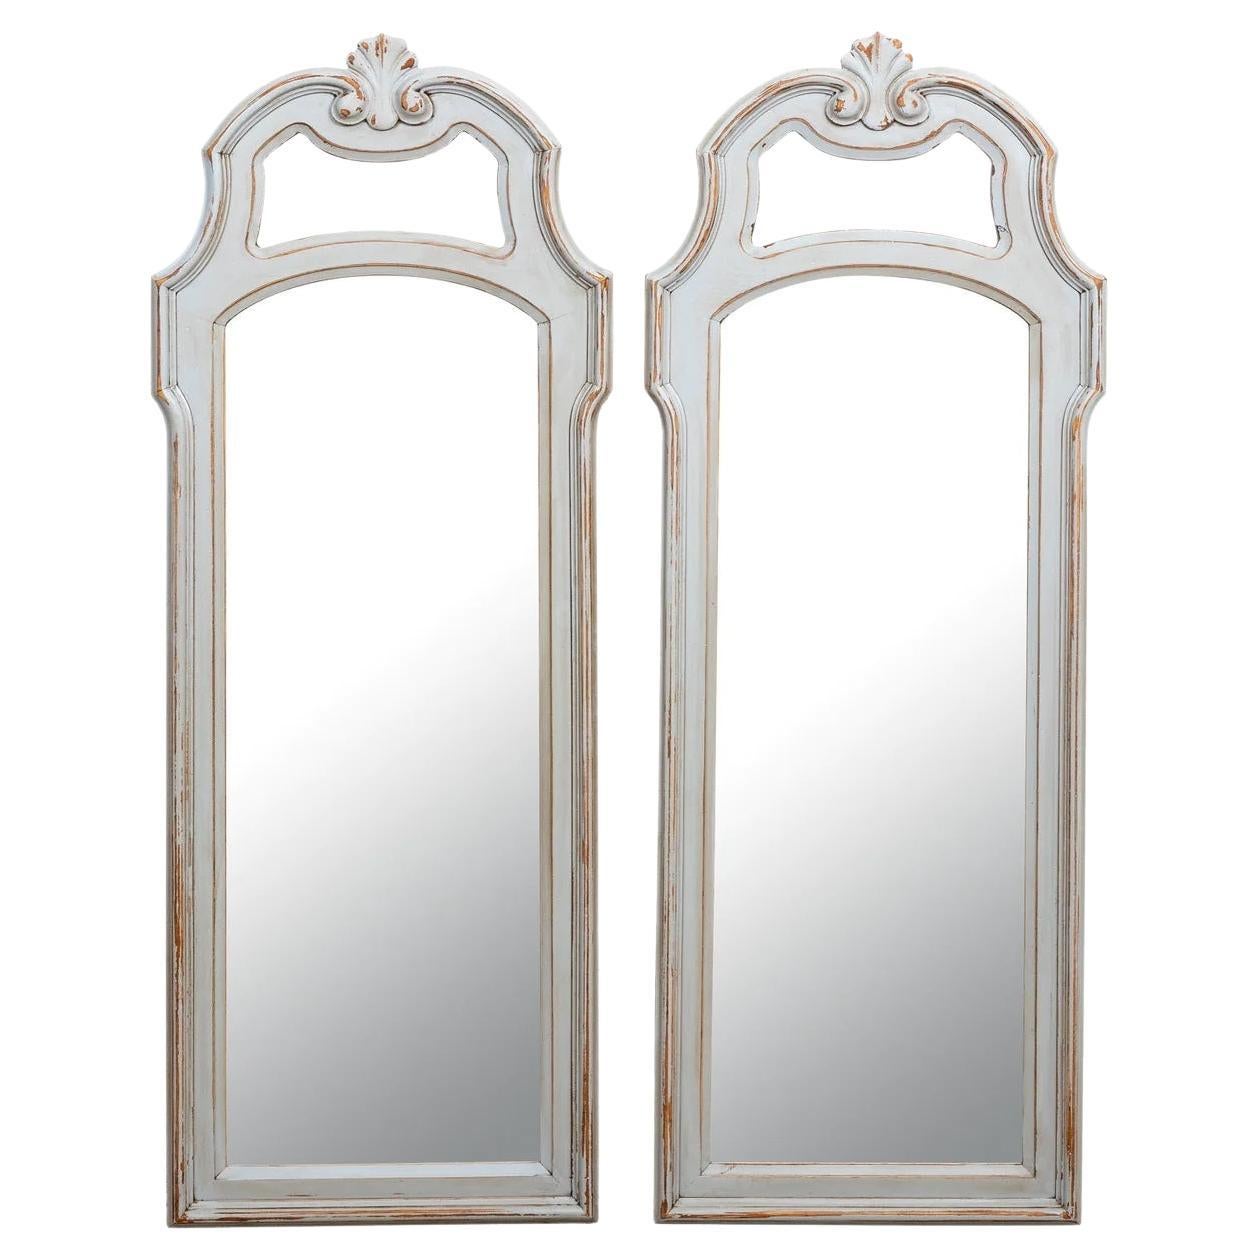 Pair Painted Distressed Mirrors